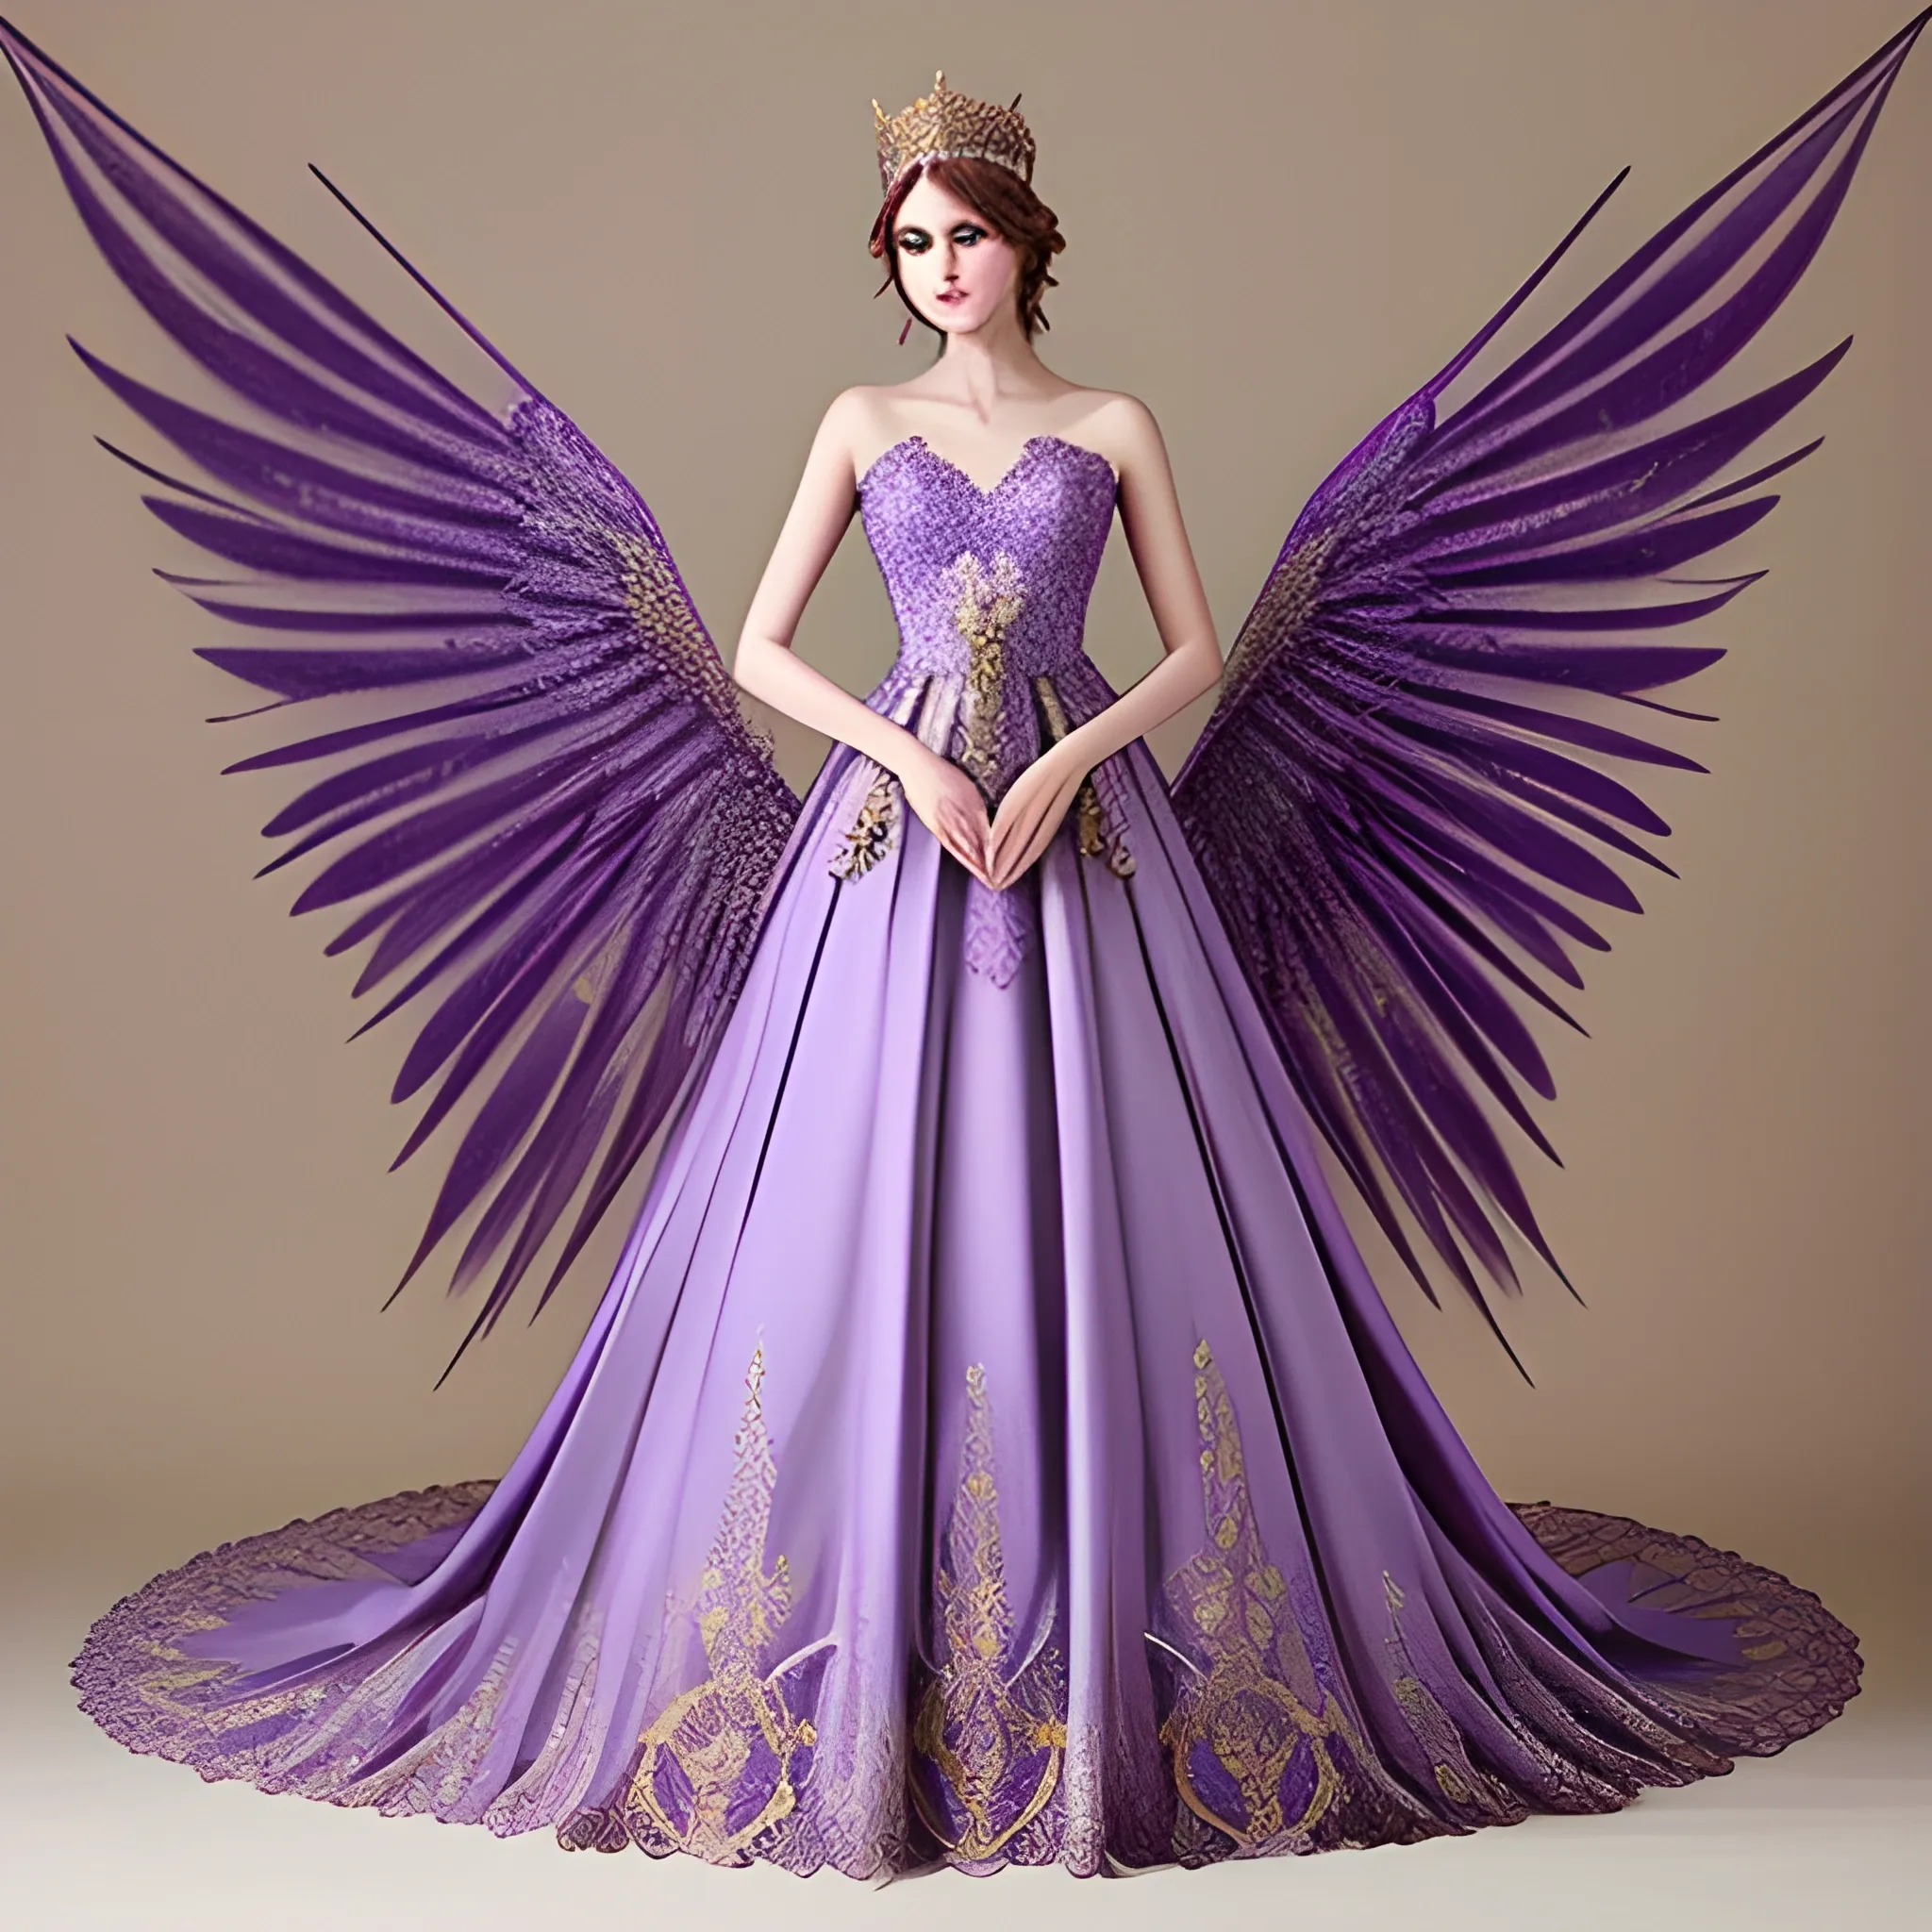 Intricate fantasy wedding gown purple and gold lace goddess wings crown style